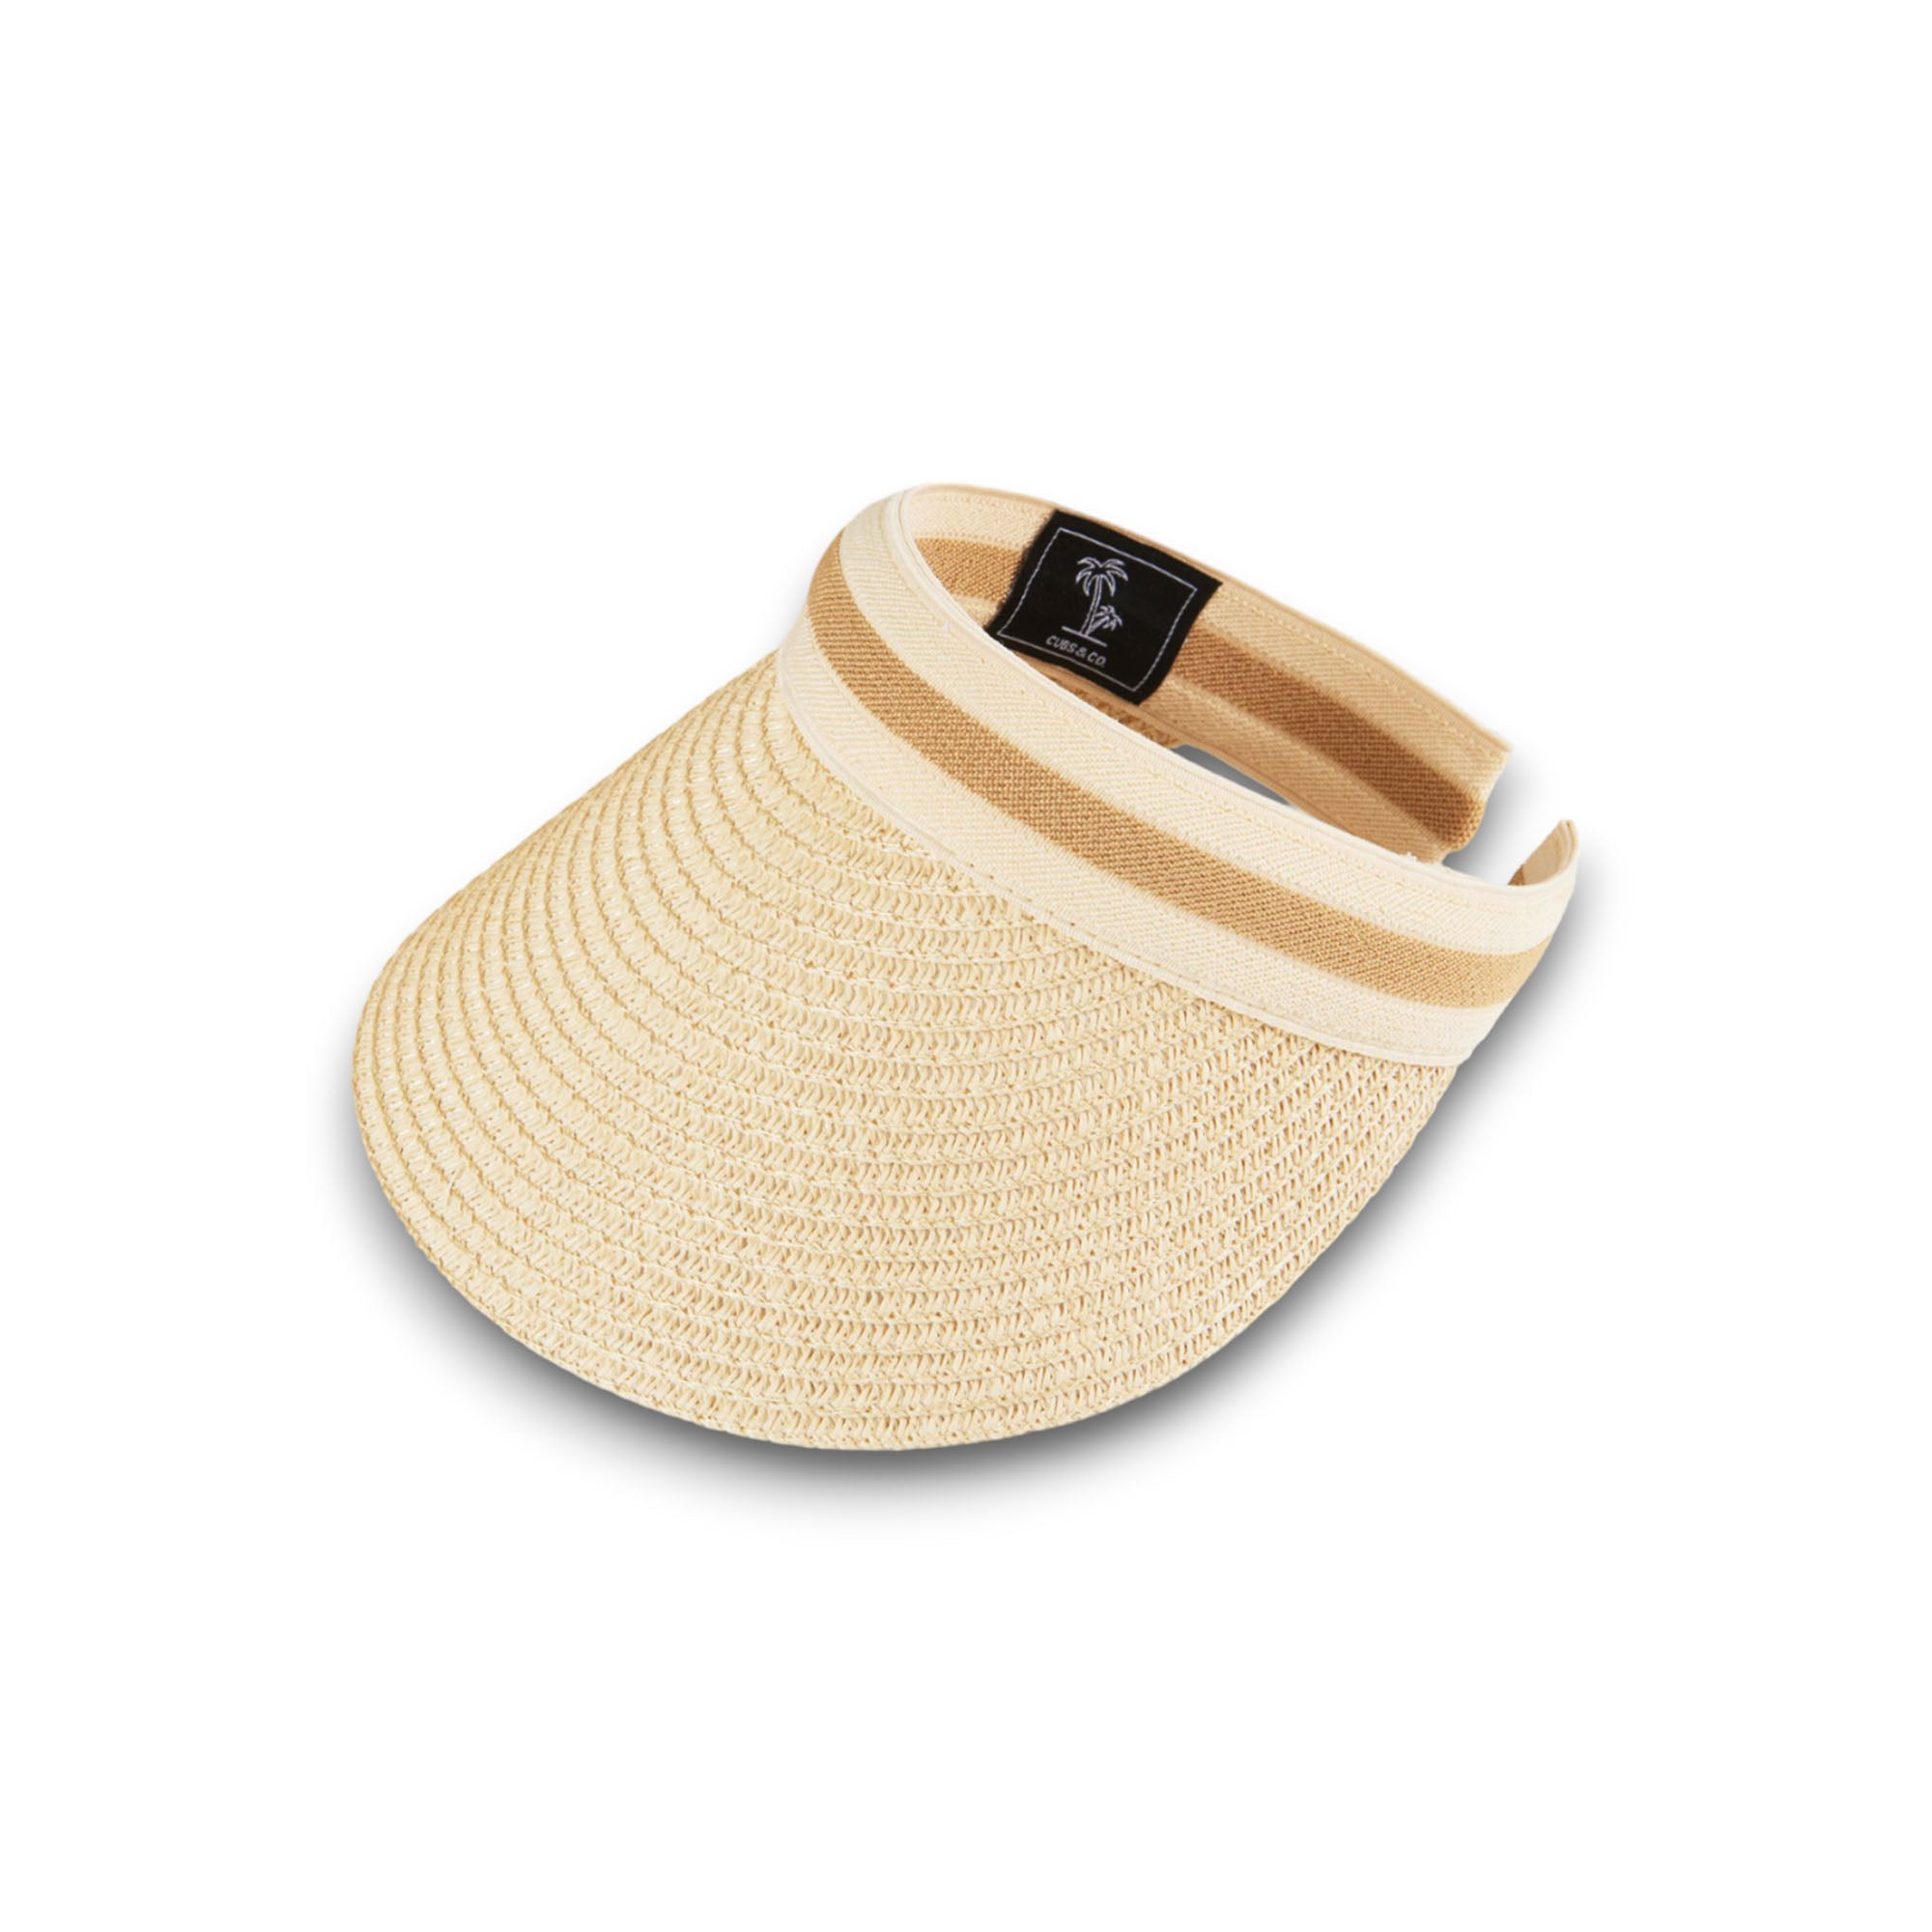 Kids & Adults Matching Sun Visors For The Whole Family - Cream 